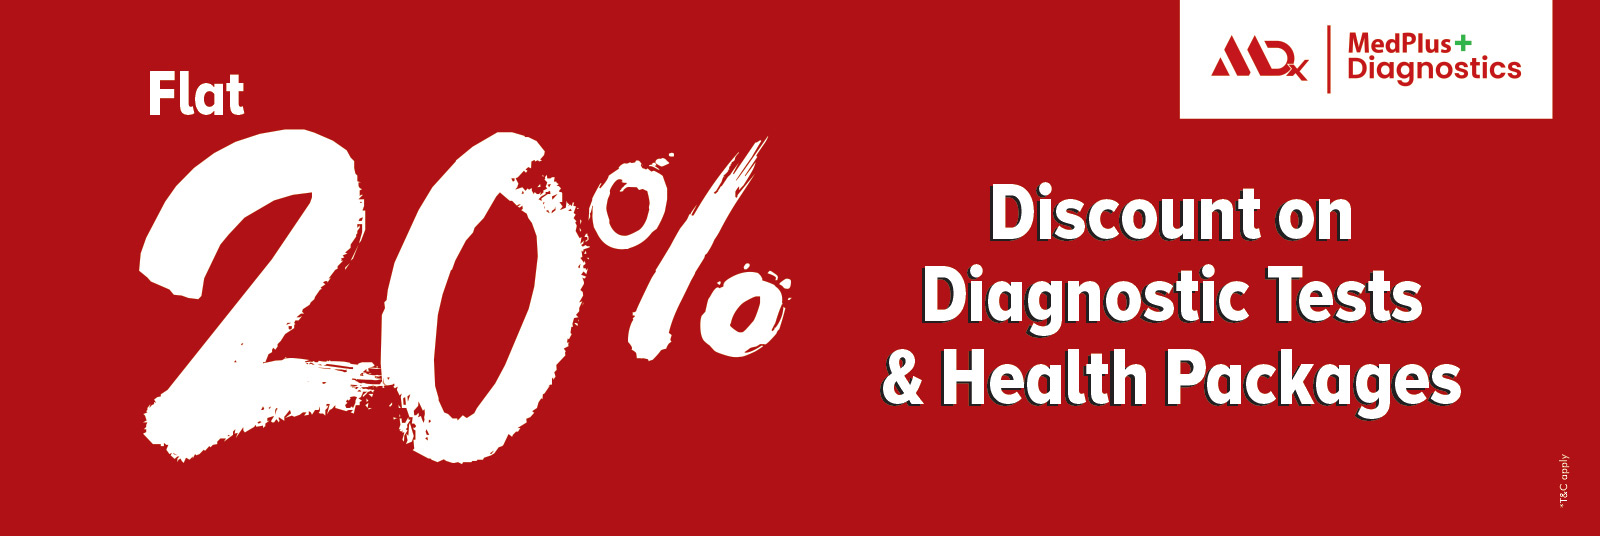 Flat 20 Percentage Discount on Lab Tests and Health Packages